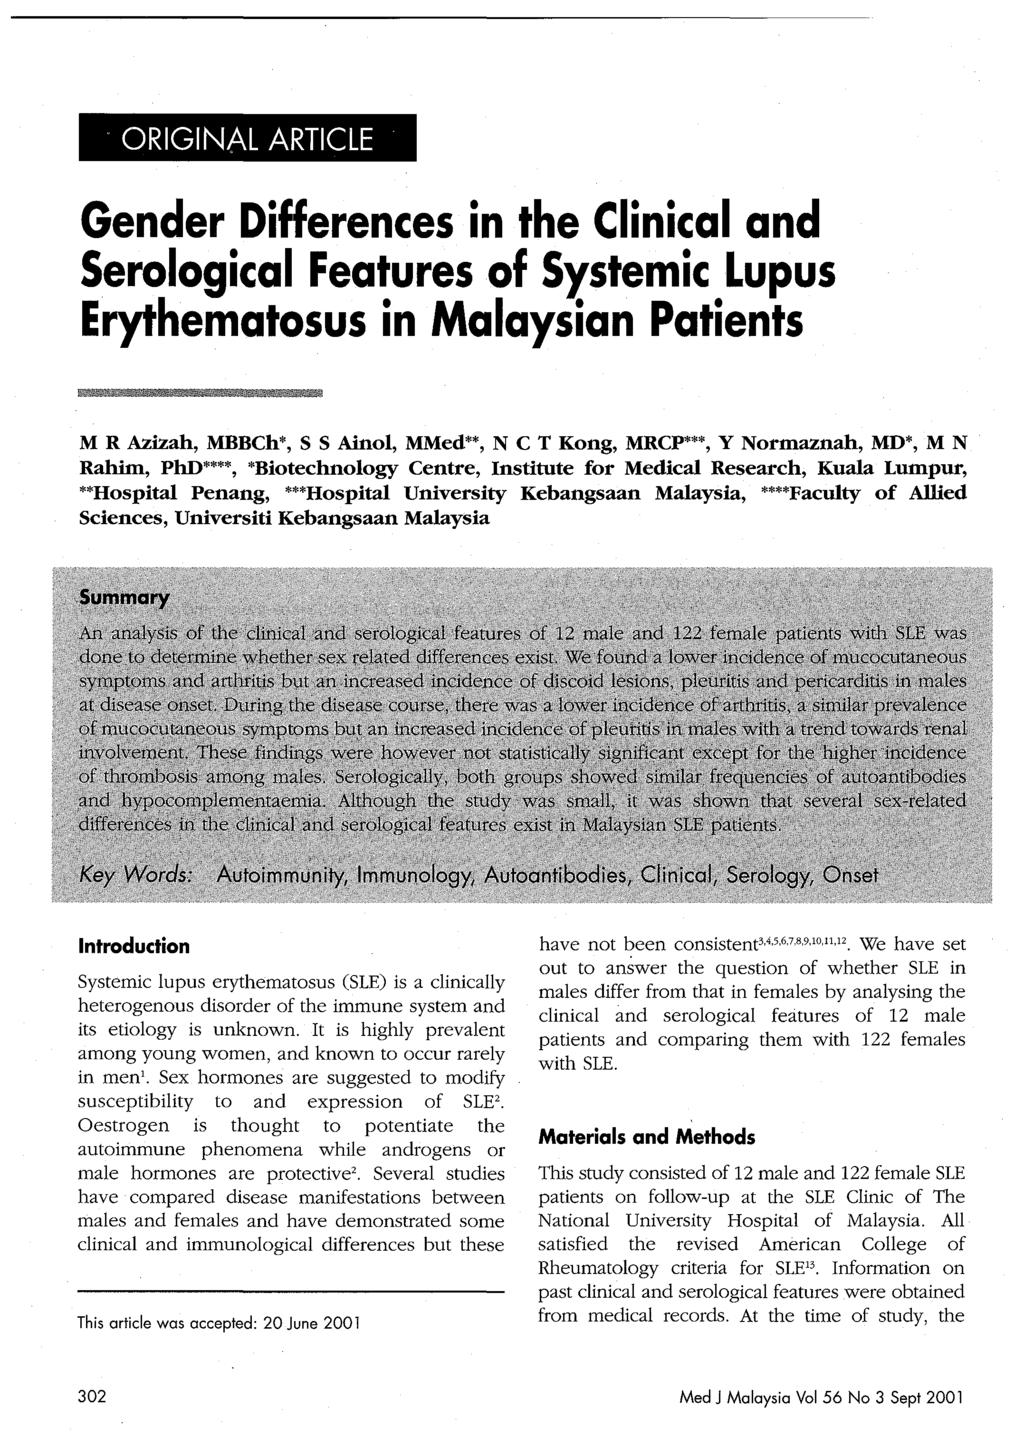 o ORIGINAL ARTICLE Gender Differences in the Clinical and Serological Features of Systemic Lupus Erythematosus in Malaysian Patients M R Azizah, MBBCh*, S S Ainol, MMed**, N C T Kong, MRCP***, Y